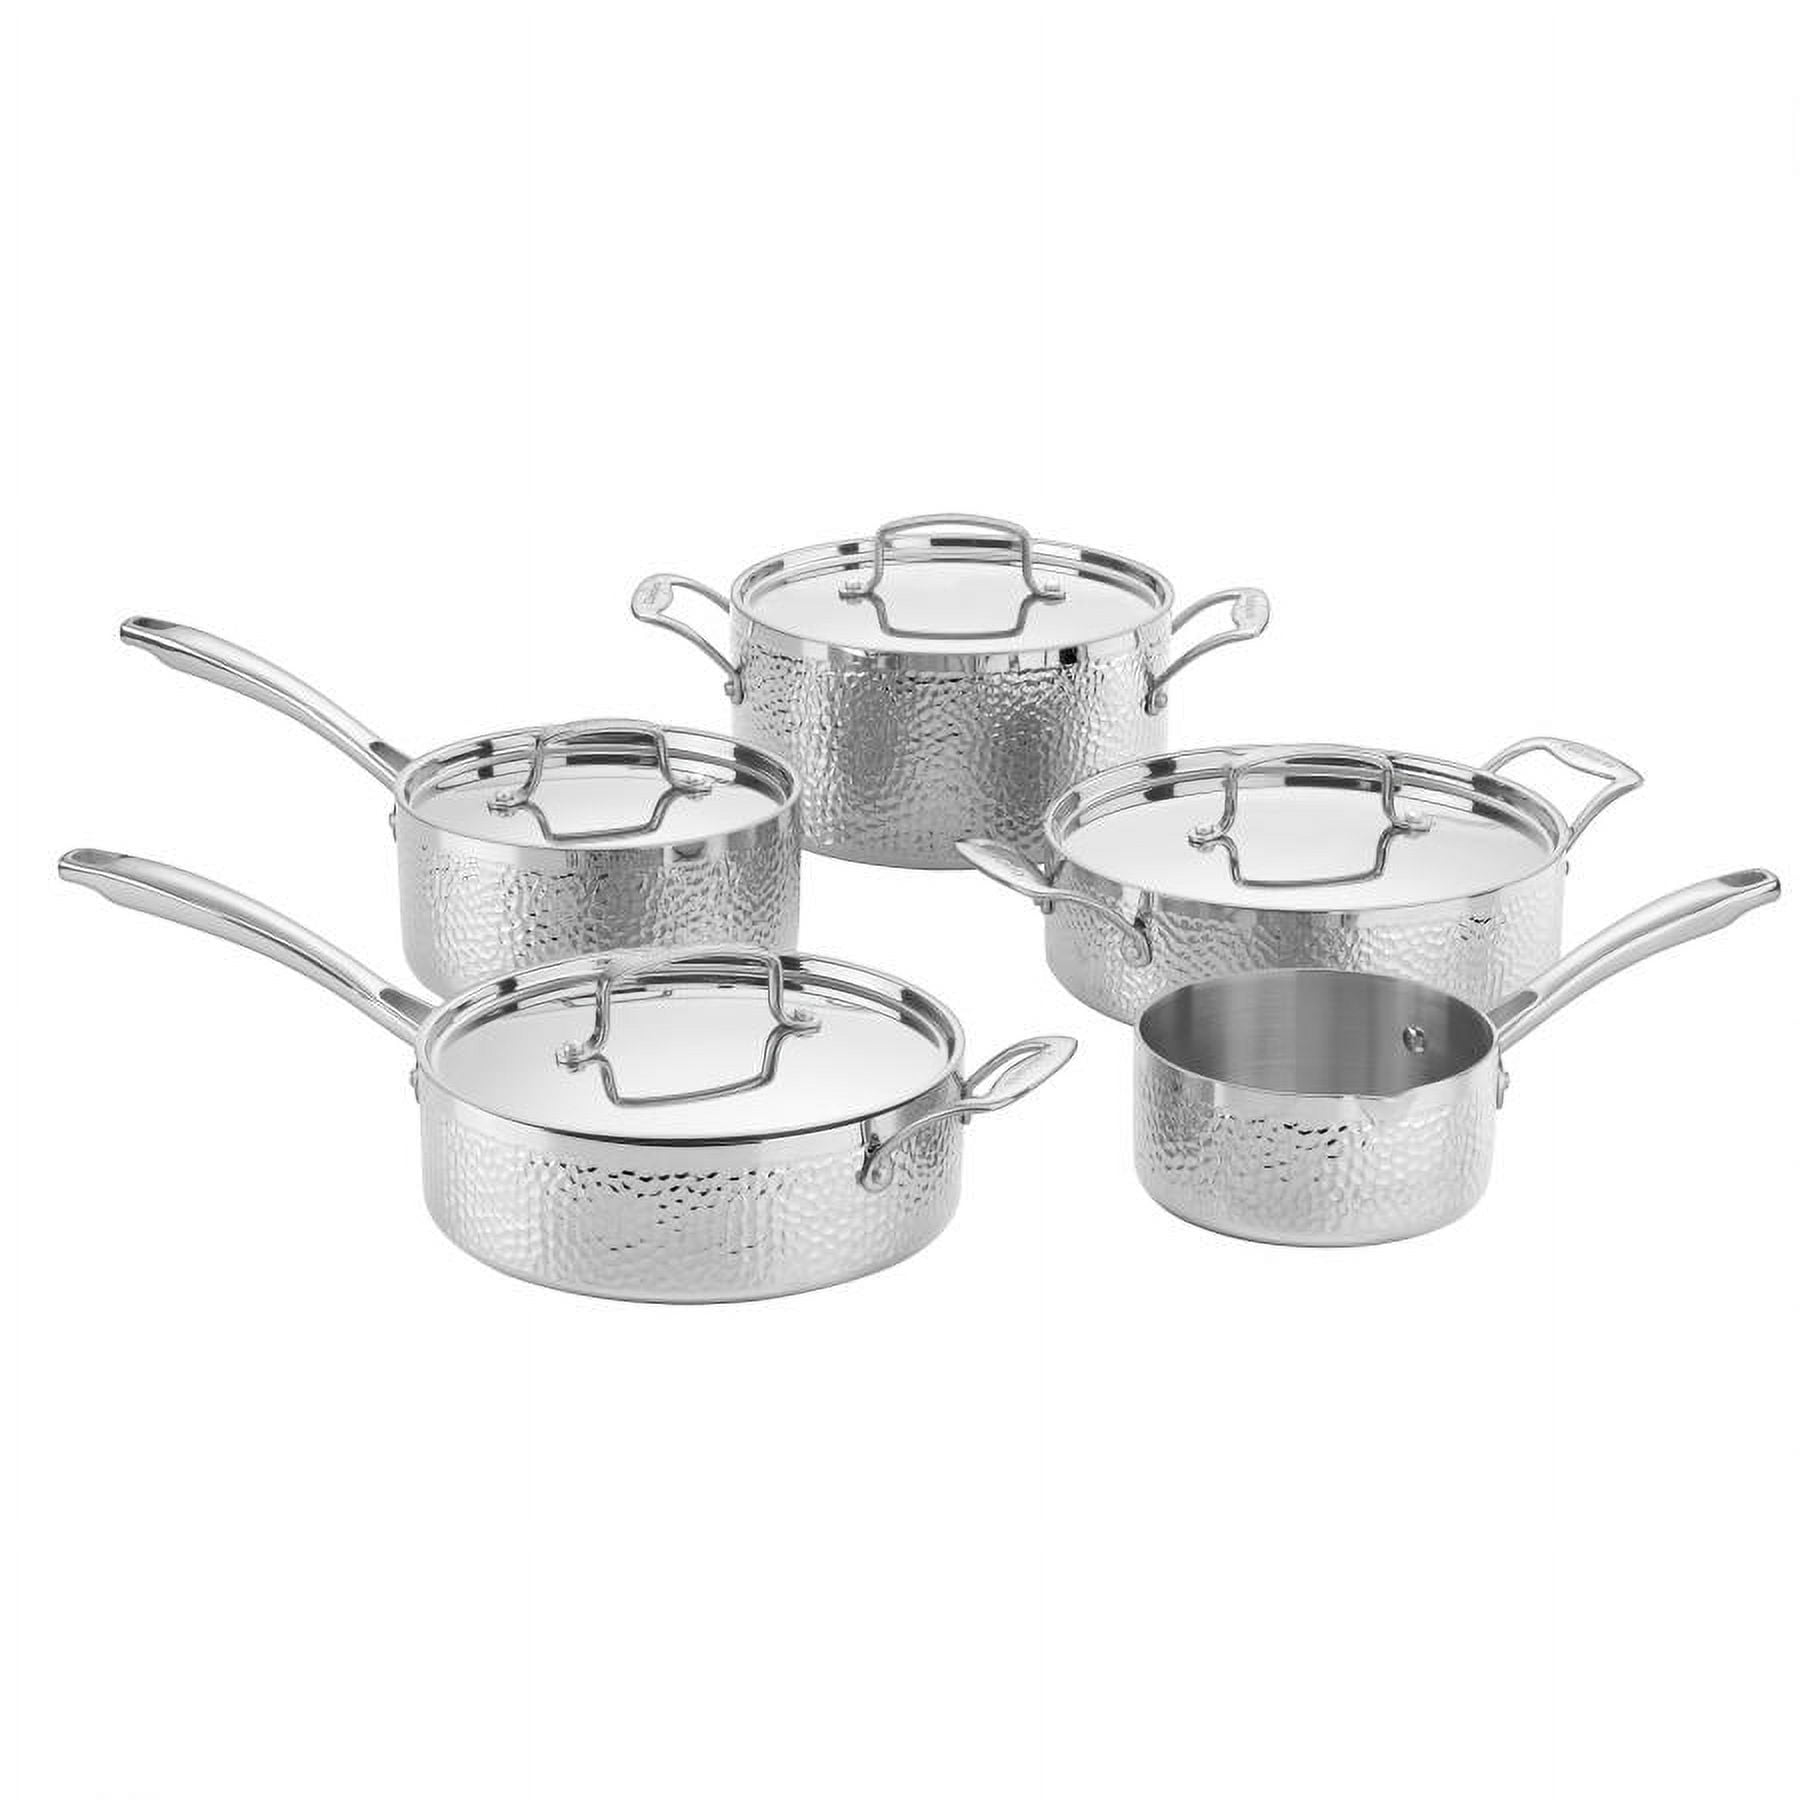 Cuisinart Hard Anodized 9-Piece Cookware Set in Black and Stainless Steel